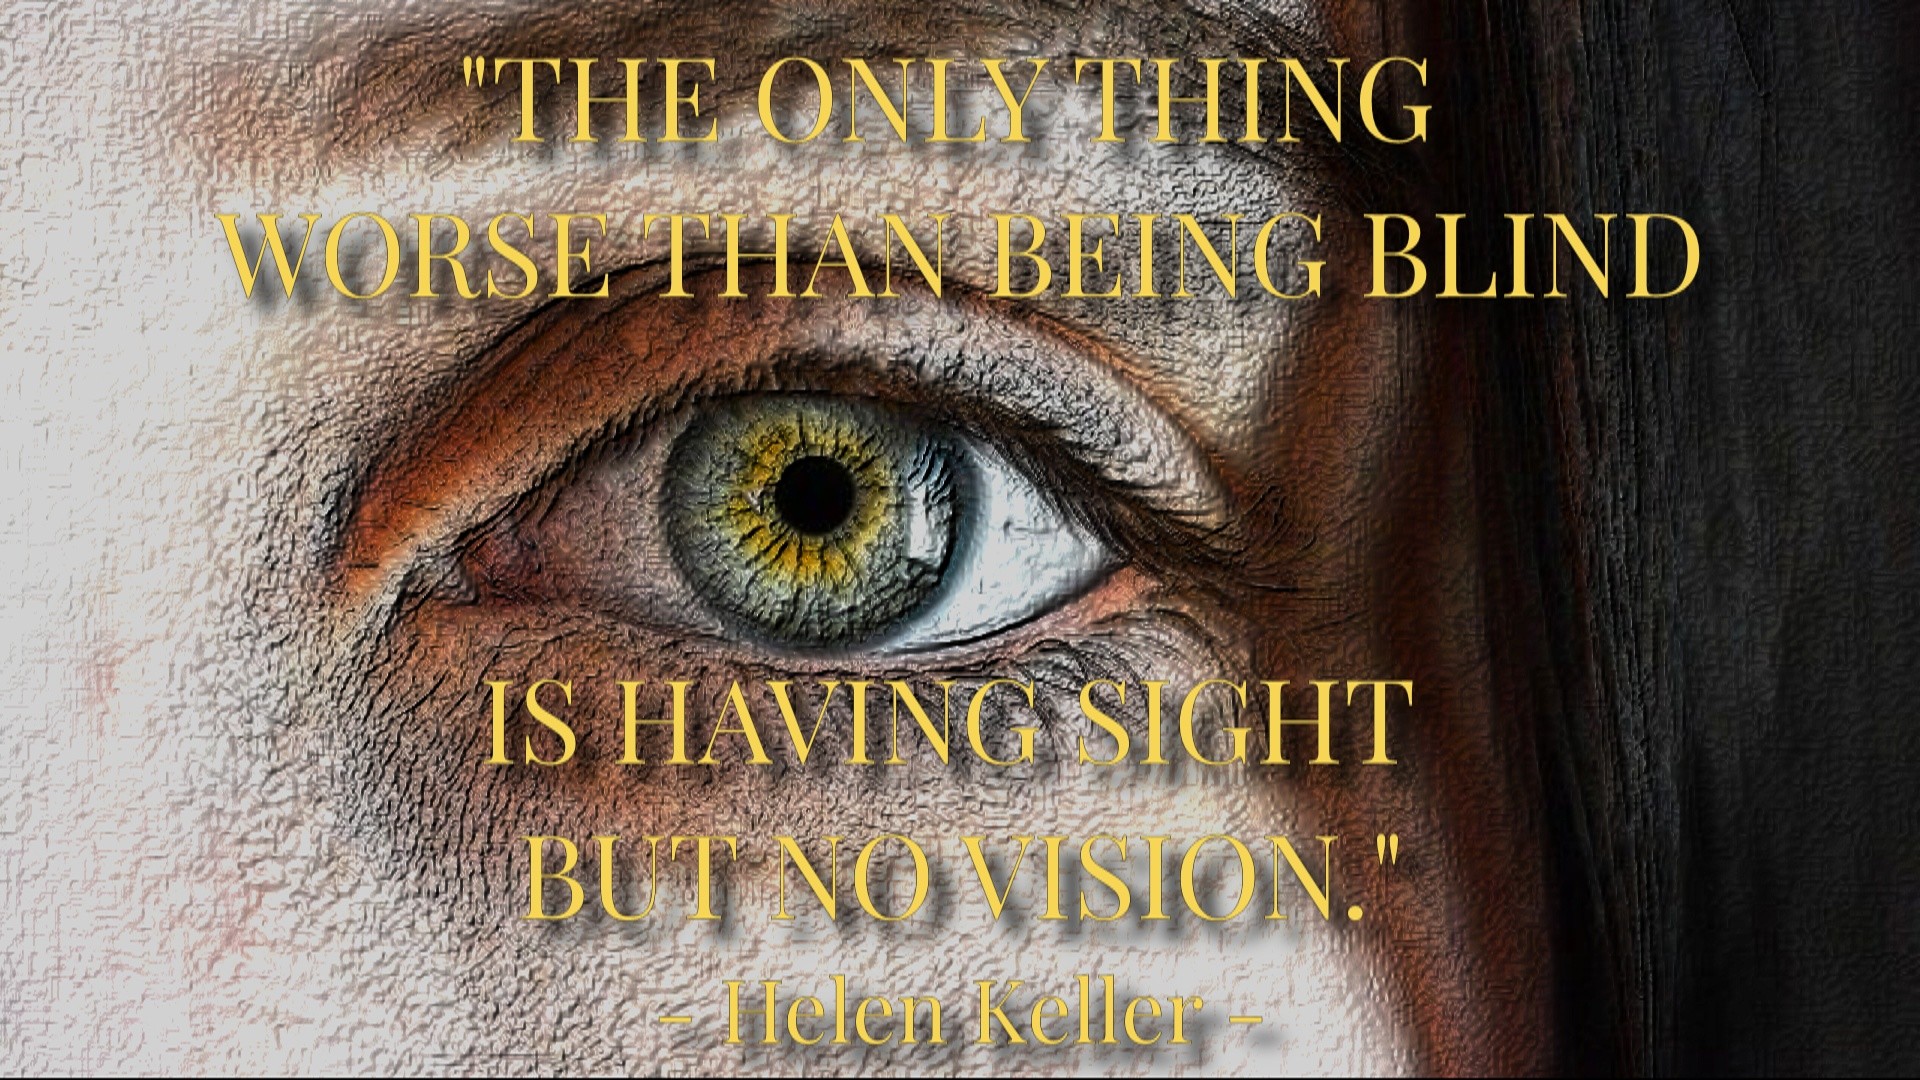 HE ONLY THING WORSE THAN BEING BLIND IS HAVING SIGHT BUT NO VISION. - Helen Keller